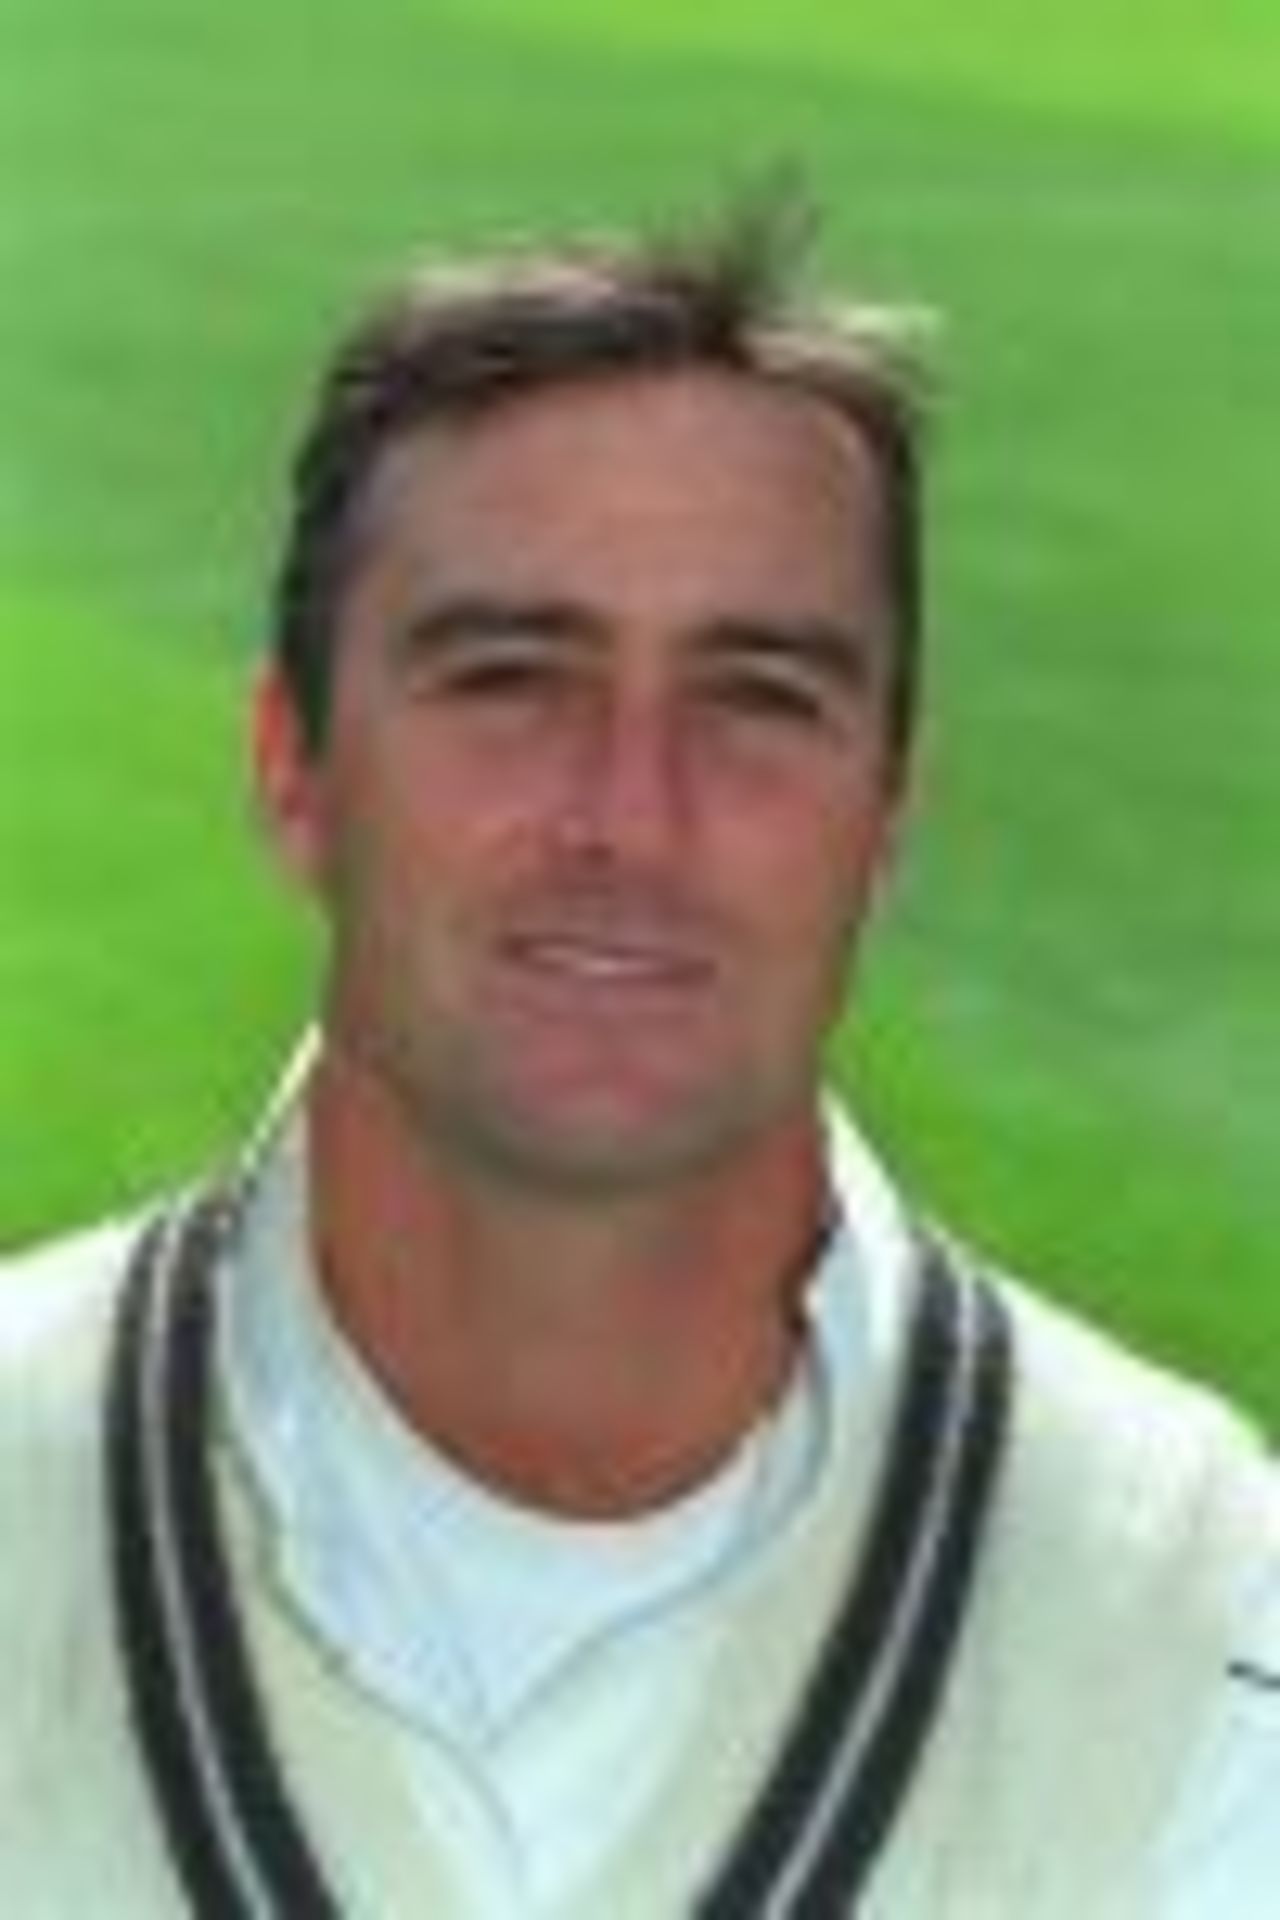 Taken at the Surrey CCC Photocall, April 2001